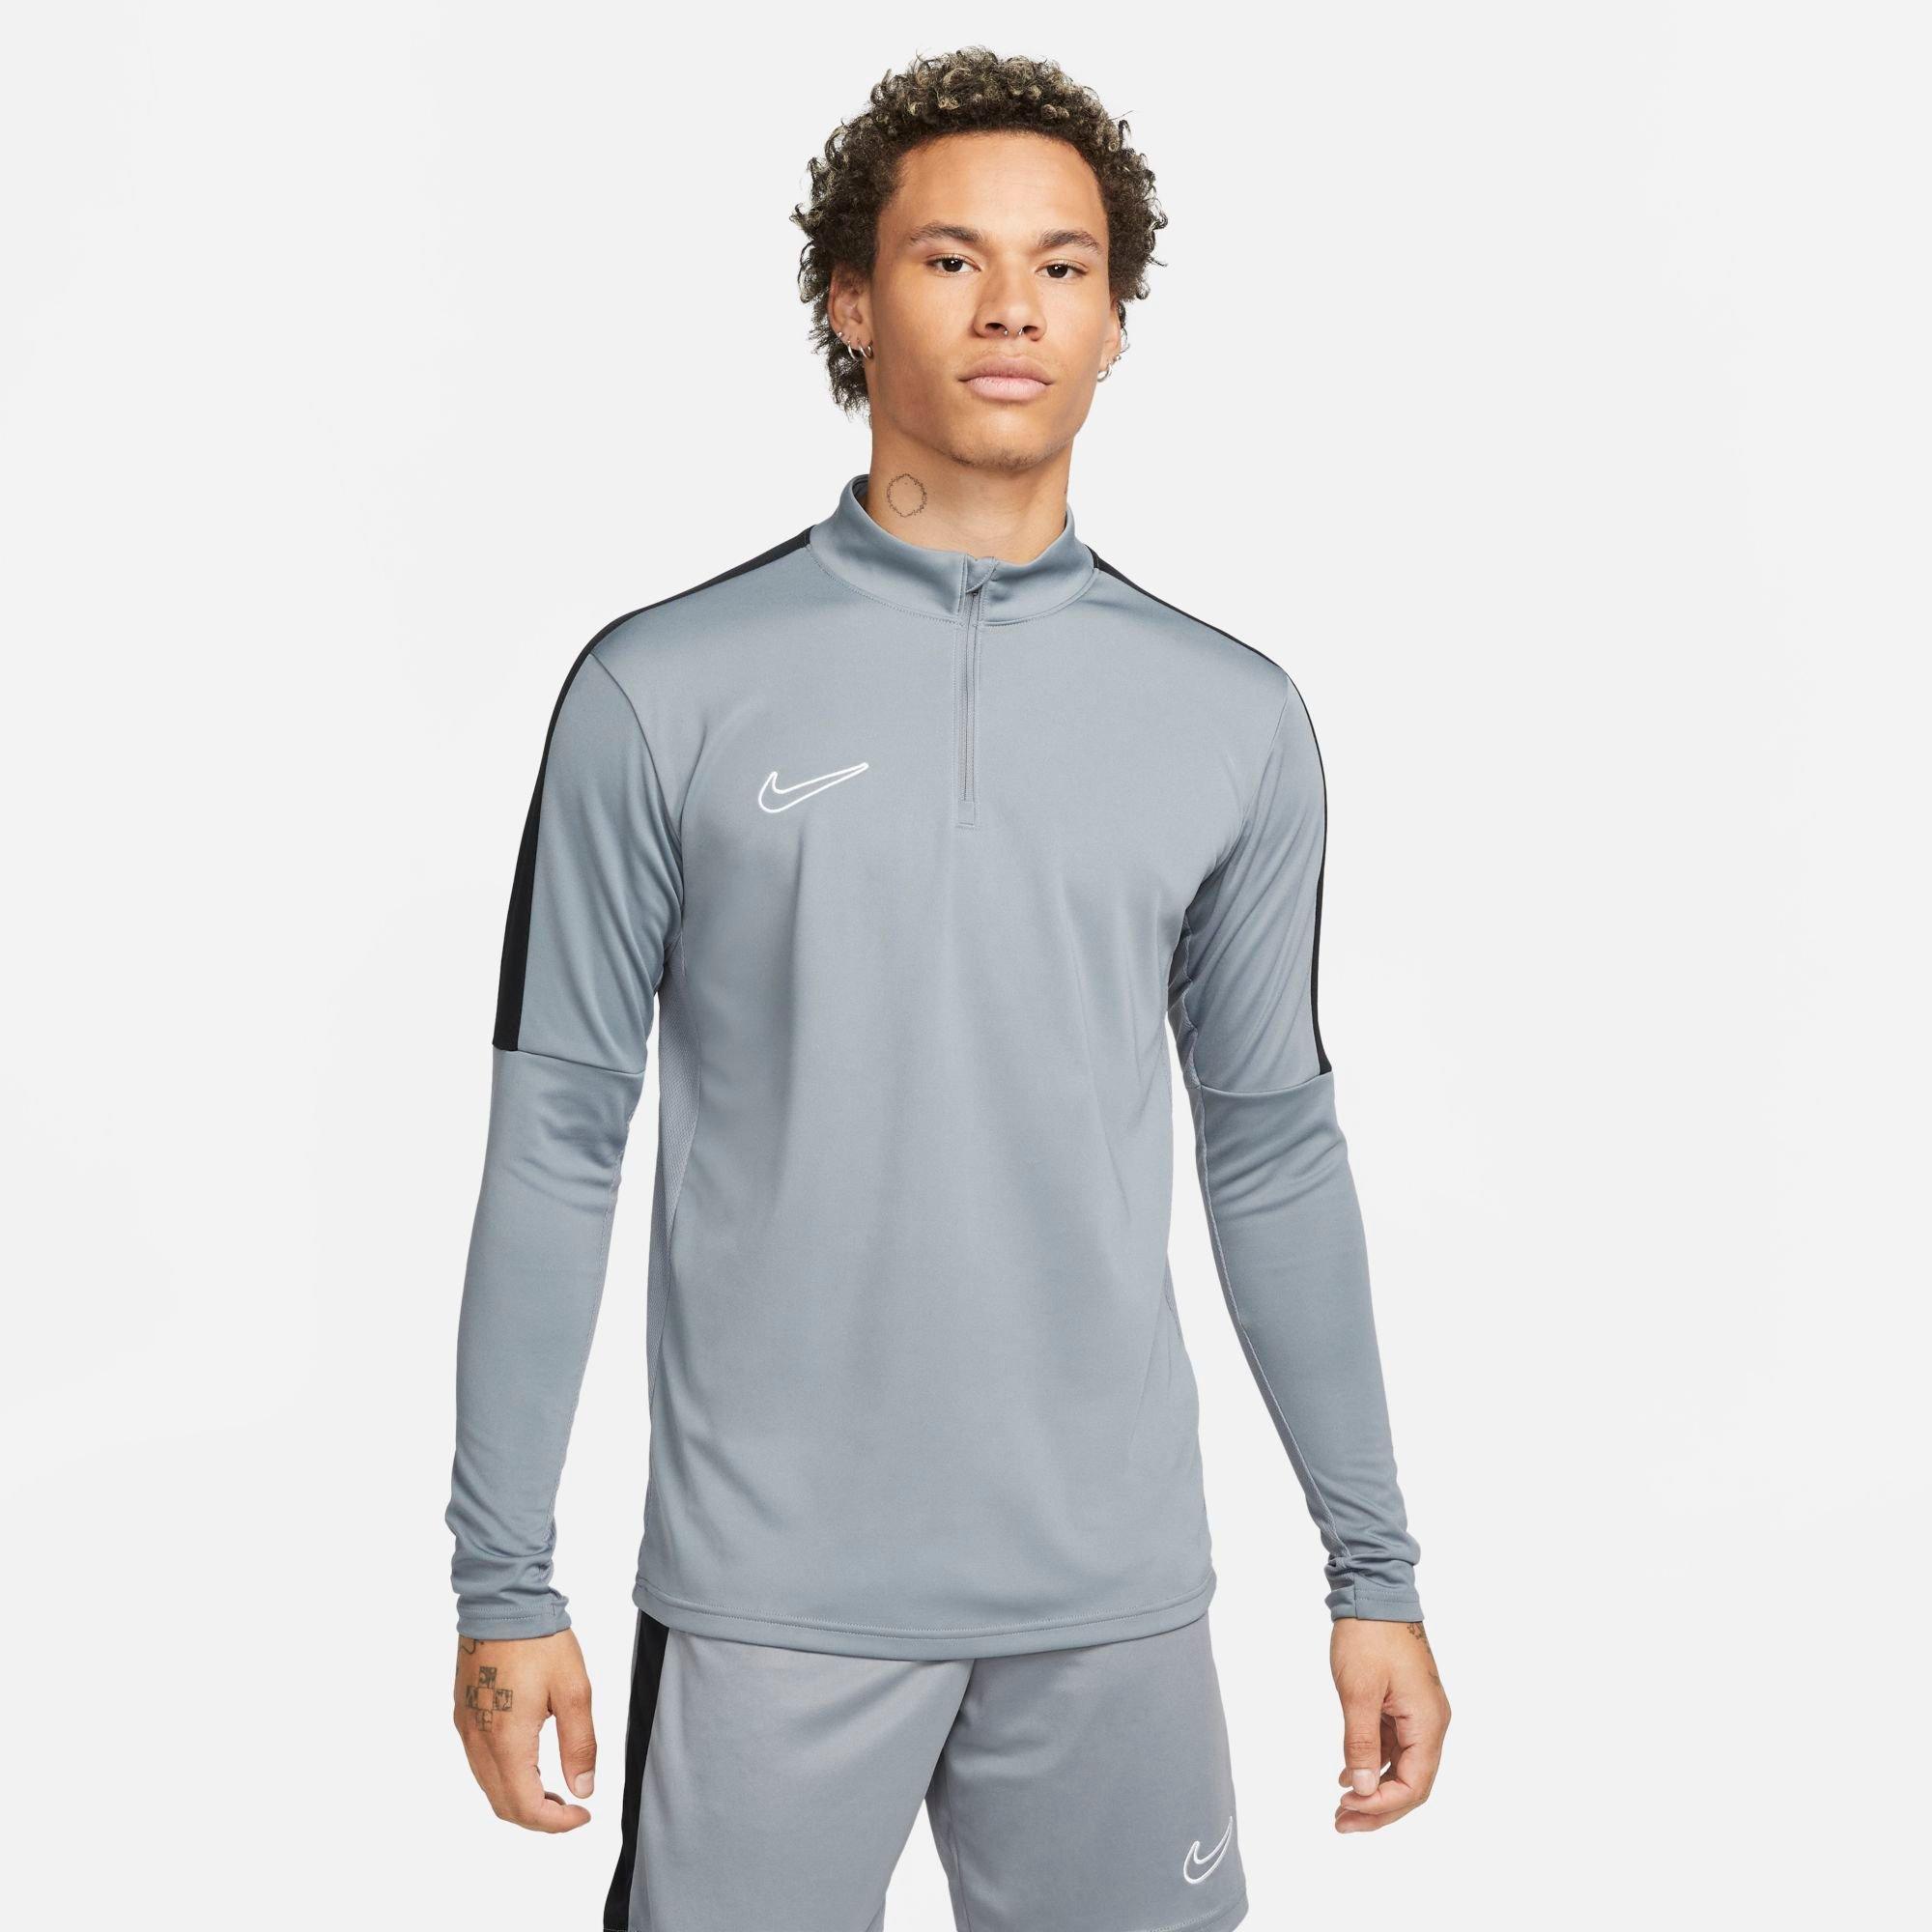 Nike Men's Dri-fit Academy Soccer Drill Top In Cool Grey/black/white